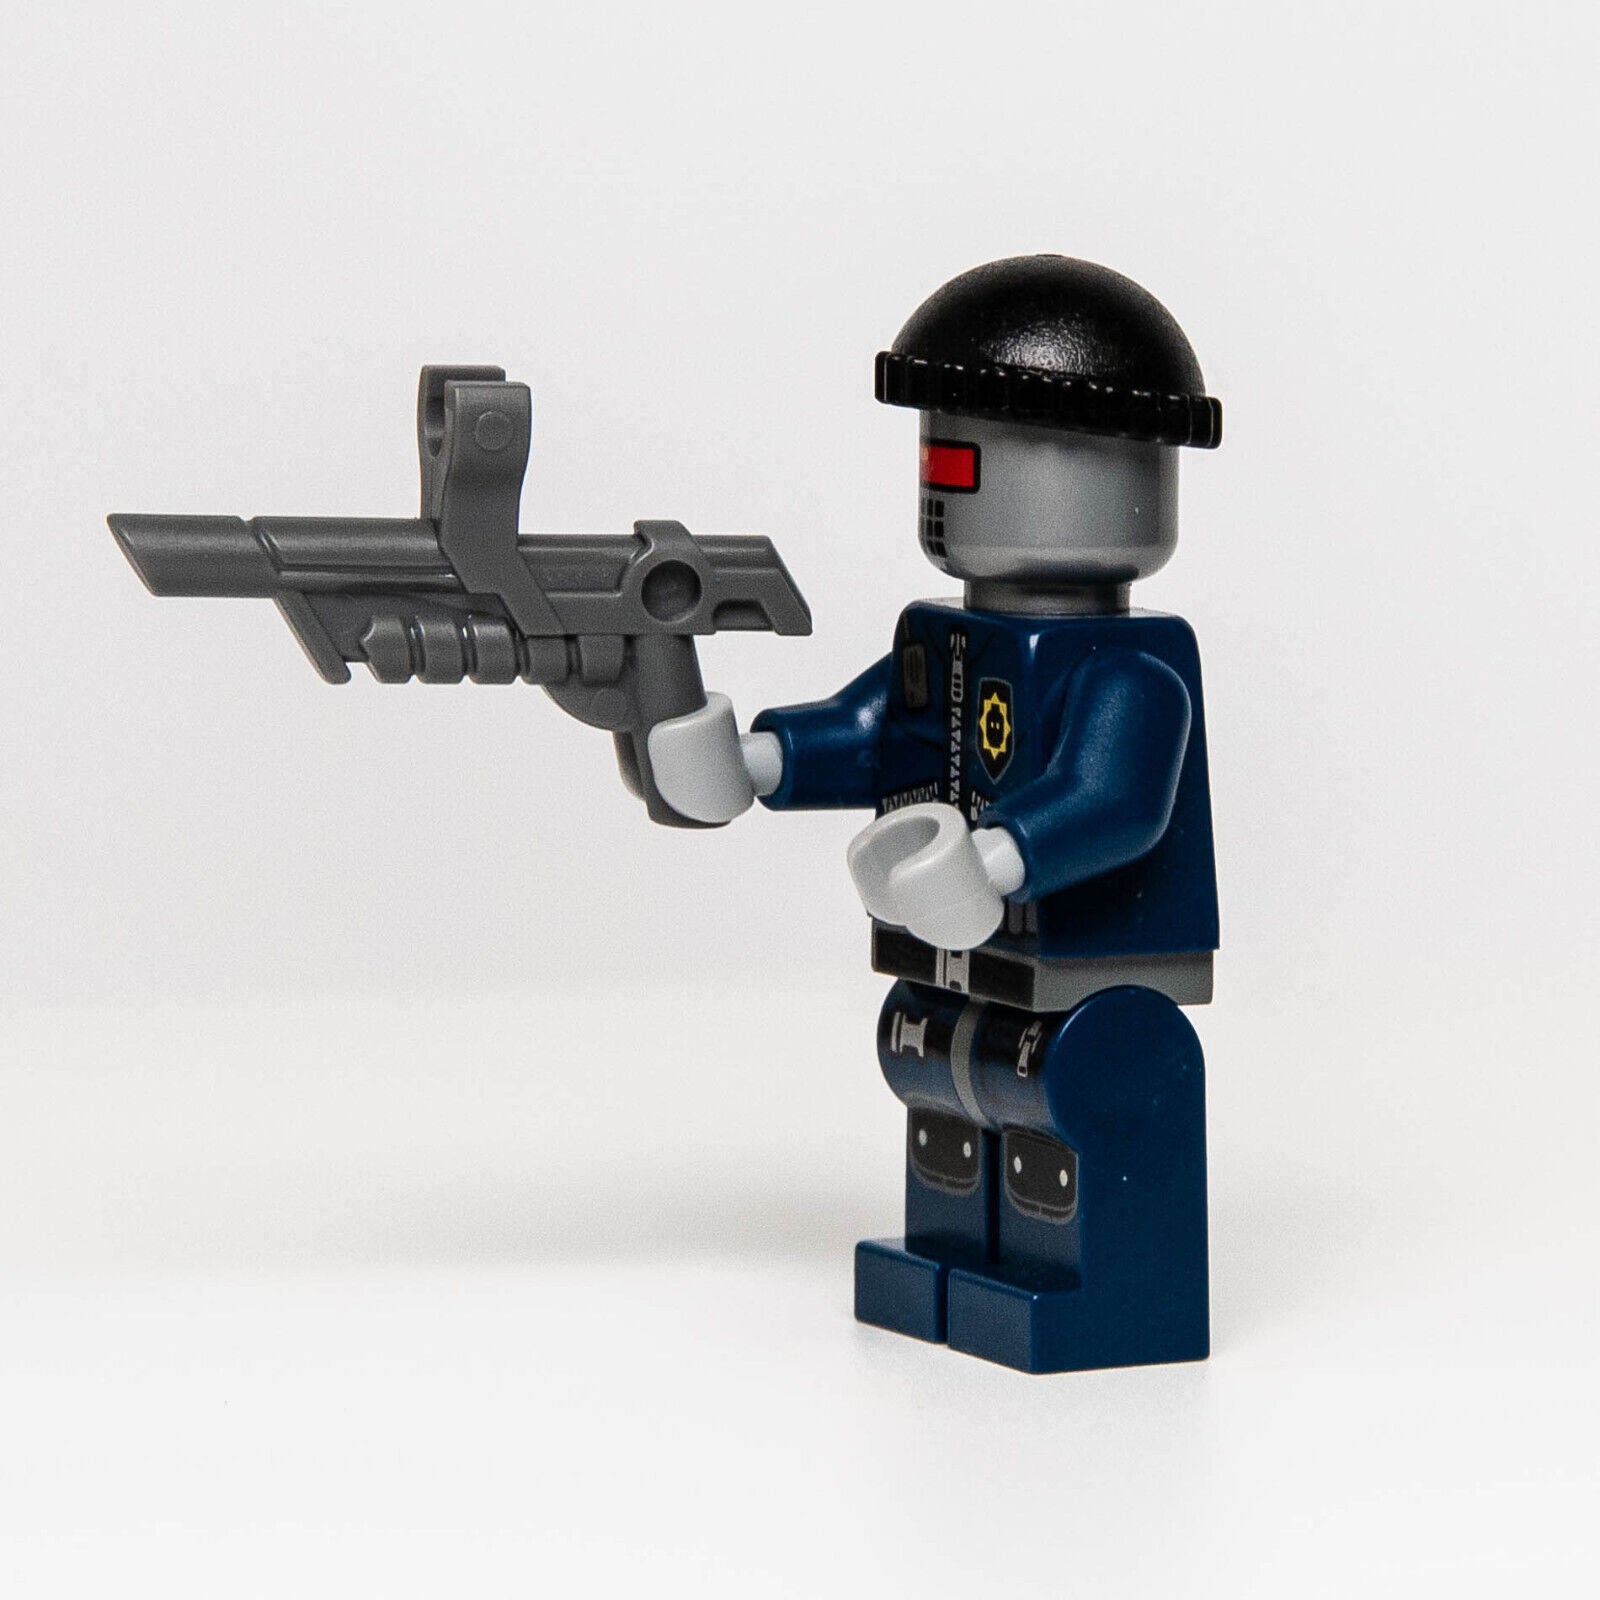 LEGO Movie Minifigure Robo SWAT Police w/ Knit Cap (tlm045) Book Exclusive